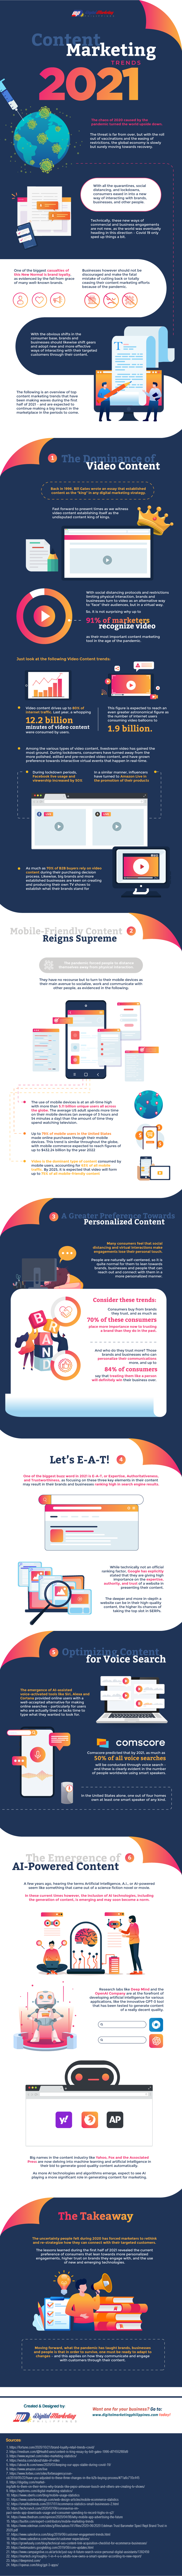 Content Marketing Trends 2021 – Mid-Year Report [Infographic]